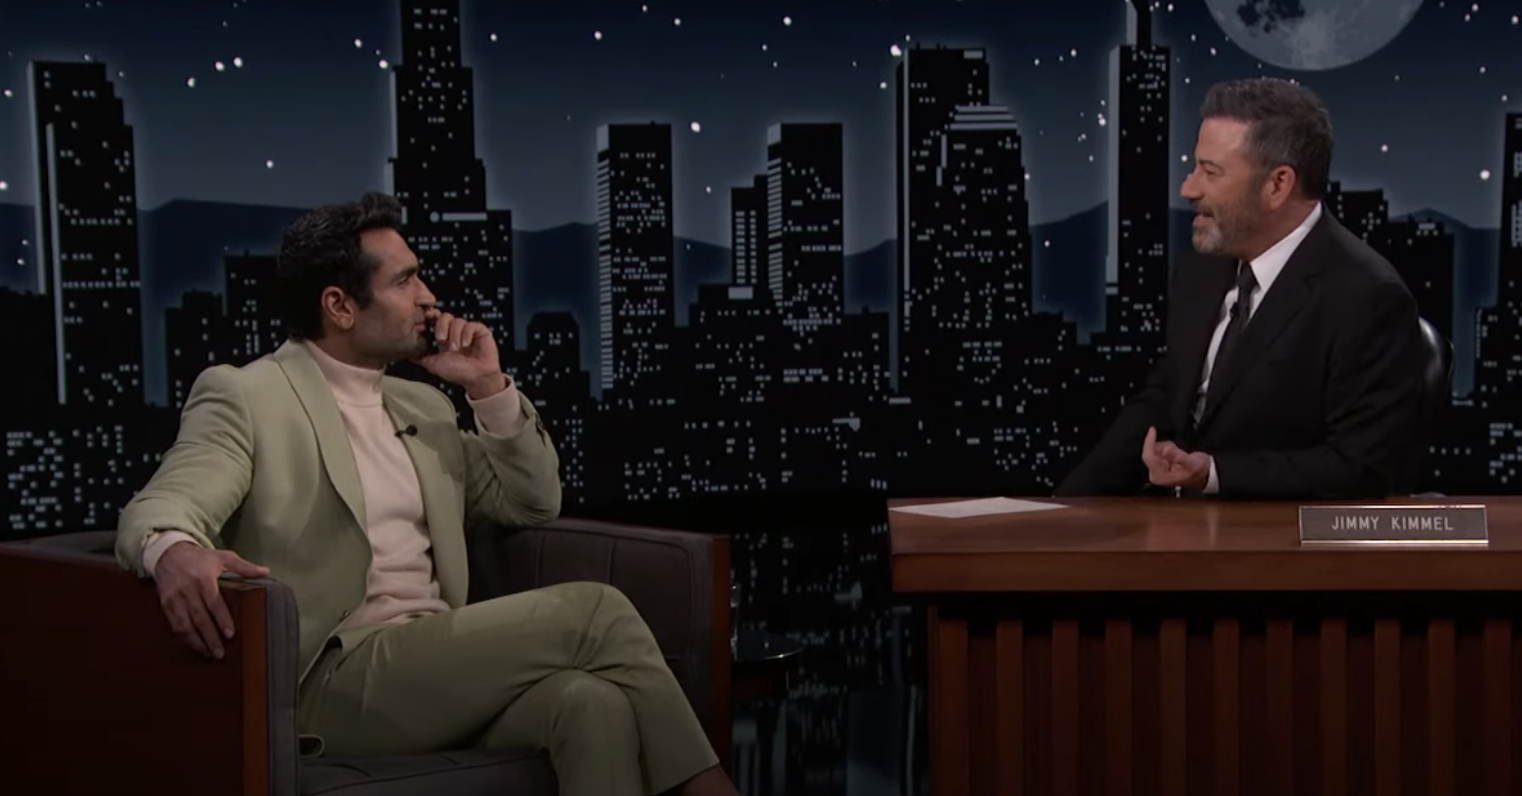 Kumail with Jimmy